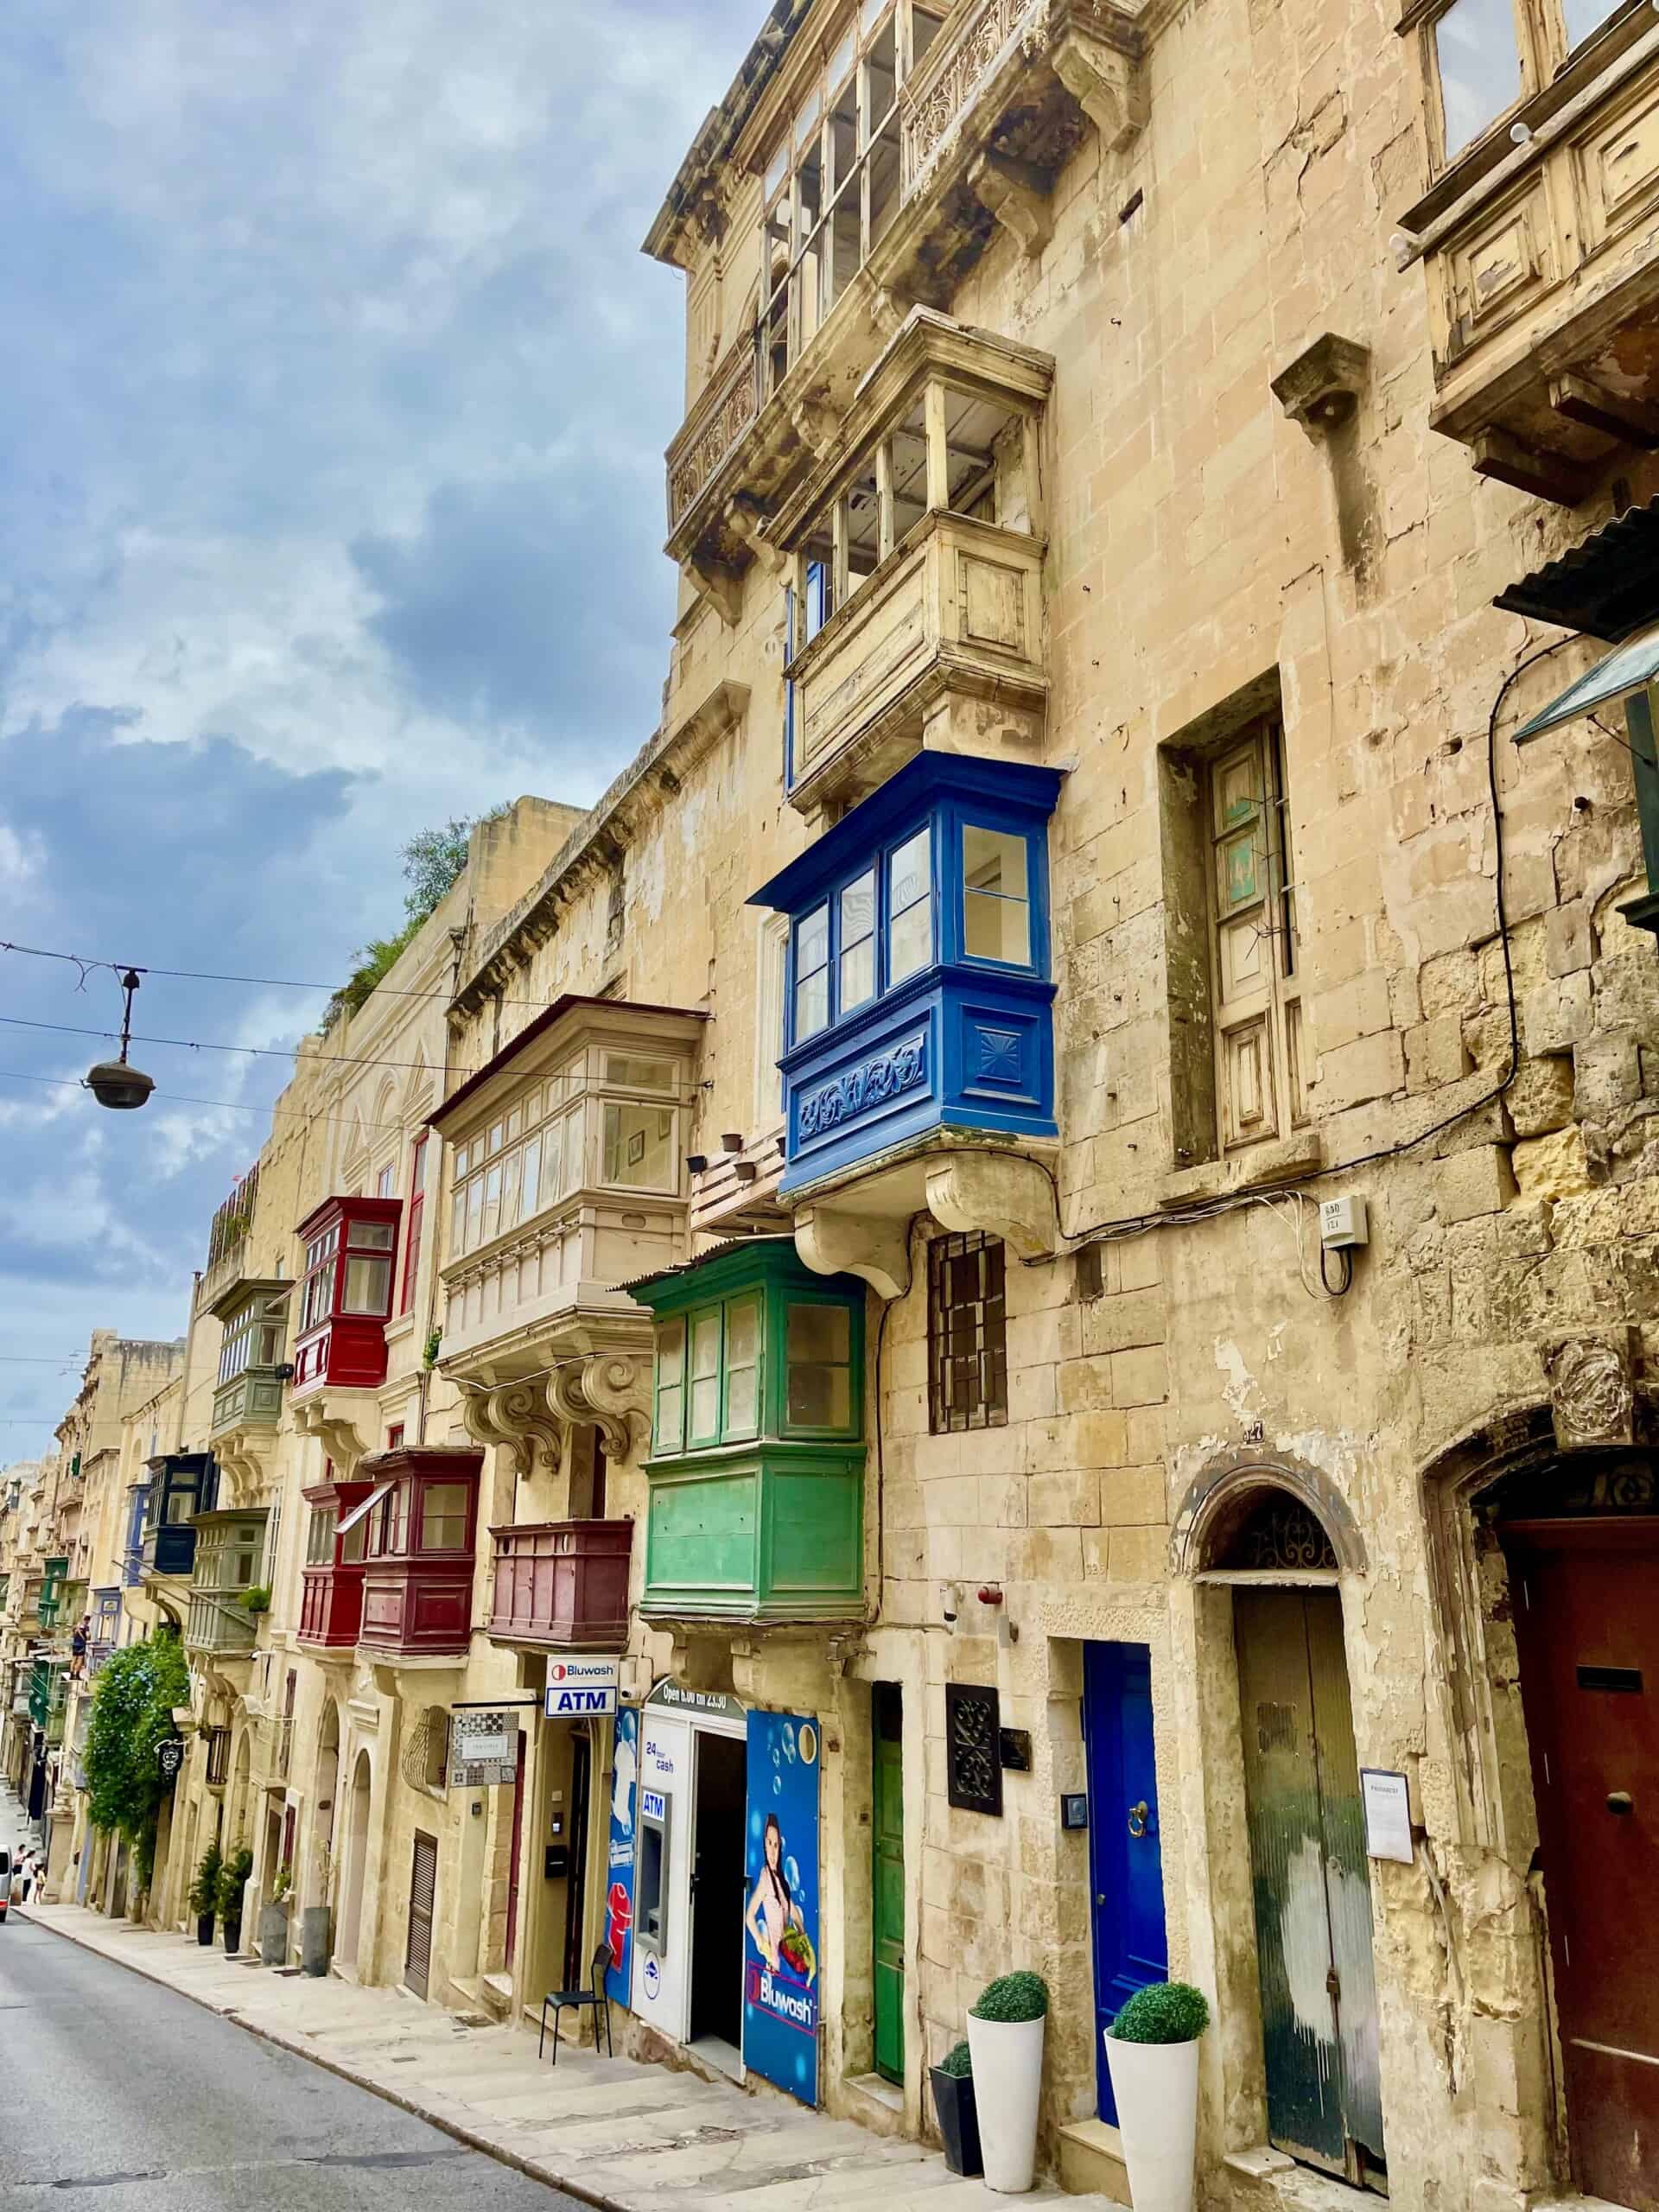 A street in Malta with honey colored stone 